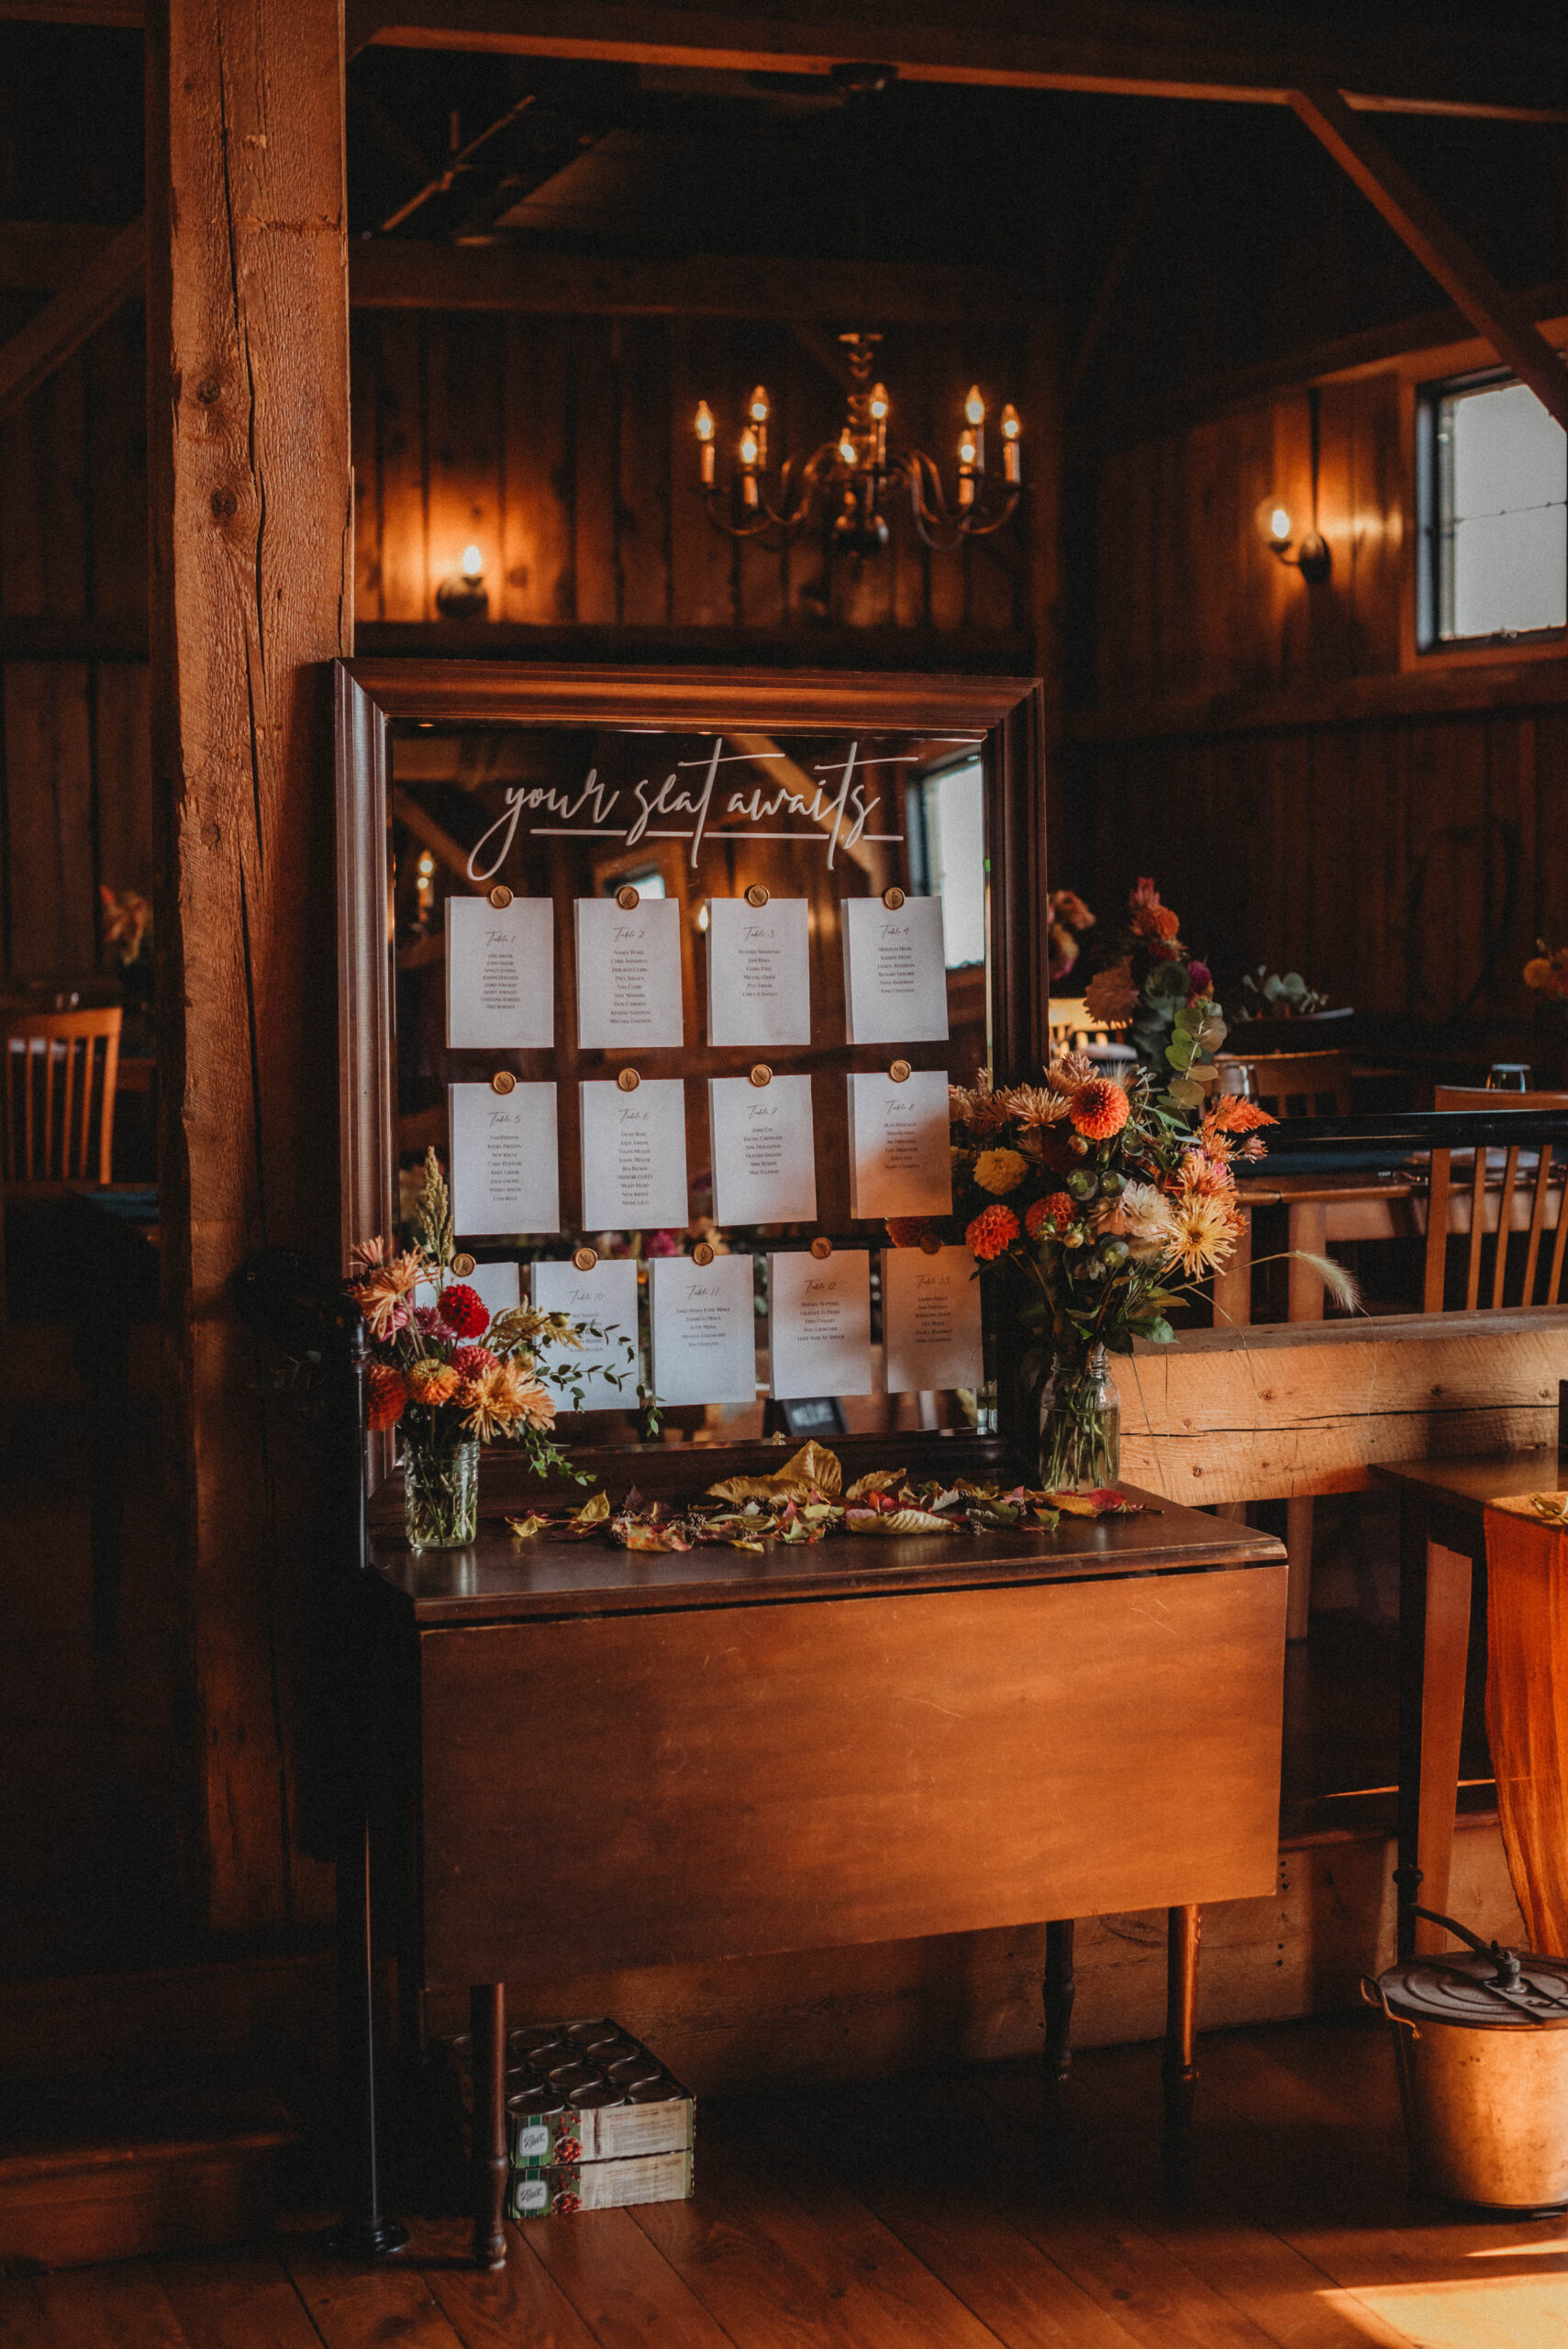 A custom designed mirror with seating chart placements inside the rustic barn venue